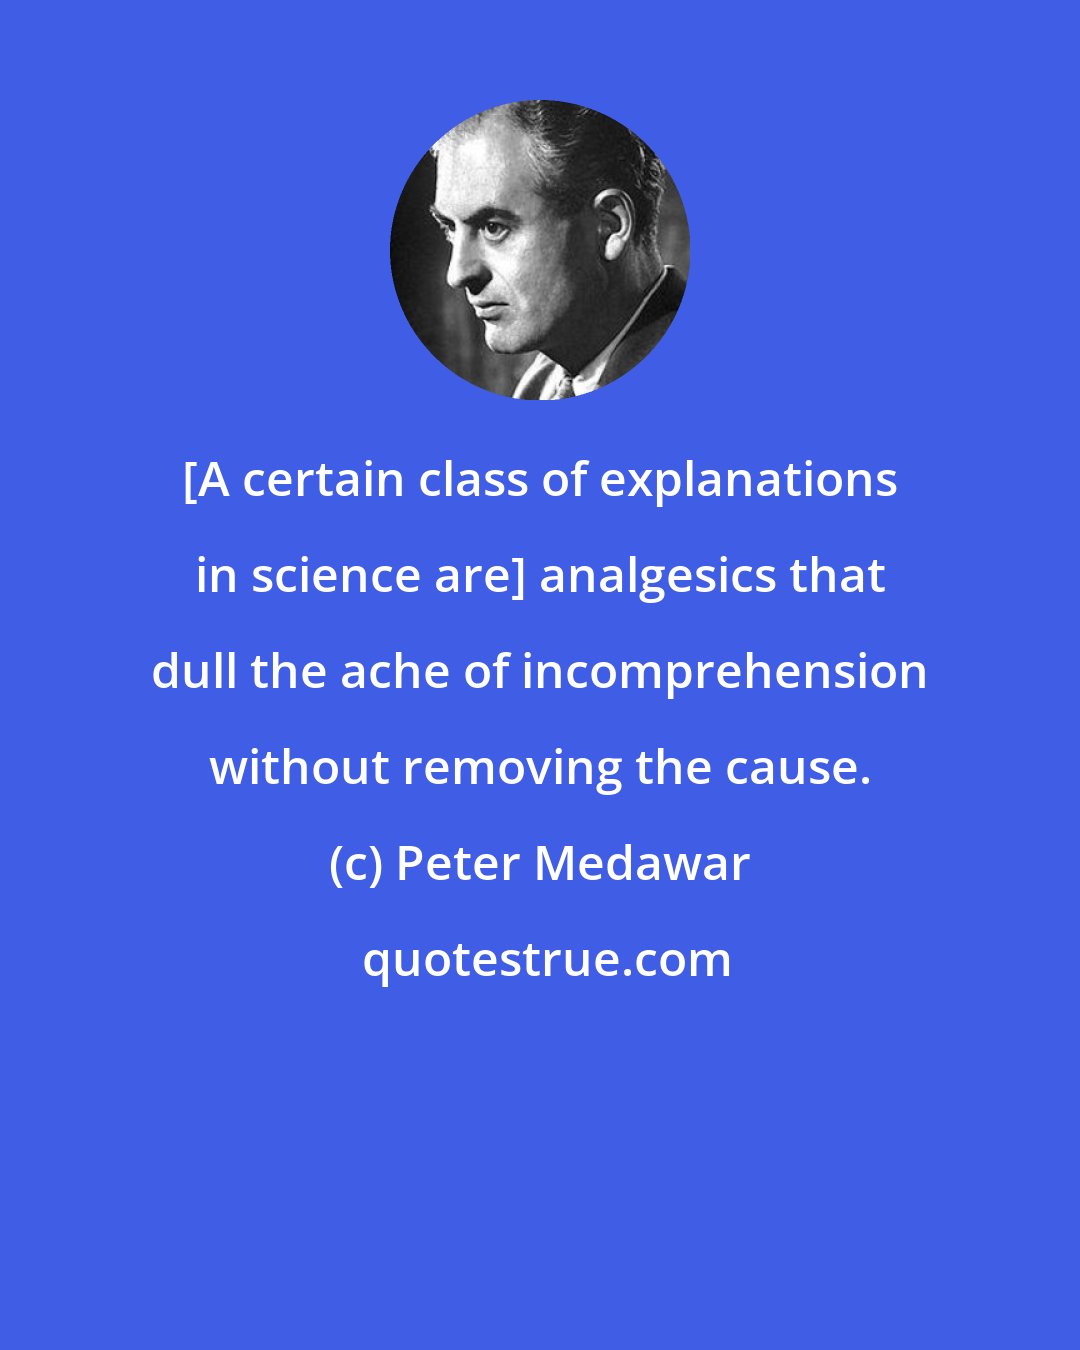 Peter Medawar: [A certain class of explanations in science are] analgesics that dull the ache of incomprehension without removing the cause.